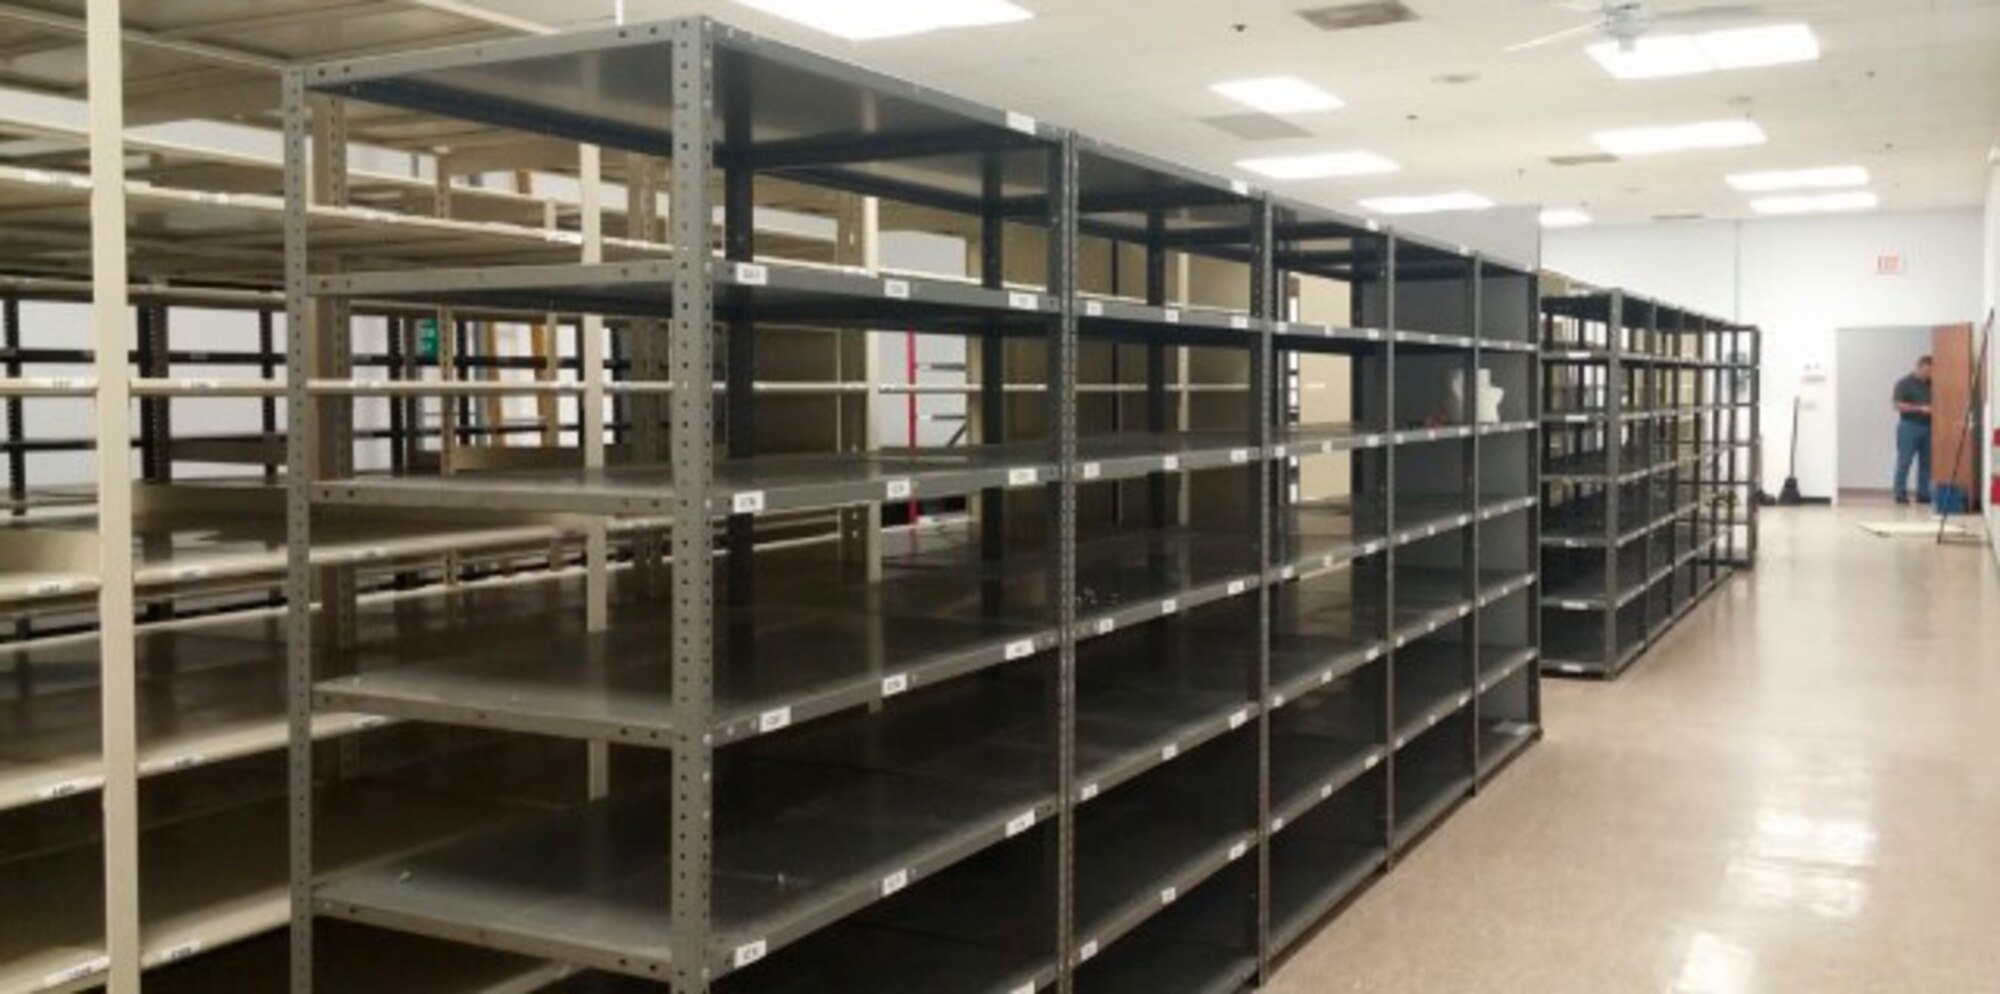 Storage shelves stand empty in a staging area at MacDill Air Force Base, Fla., Oct. 3, 2016. The wing records managers digitized their 1,700 square foot staging area over the past two years, freeing up the necessary storage to house future accountability of equipment received. (Courtesy Photo)